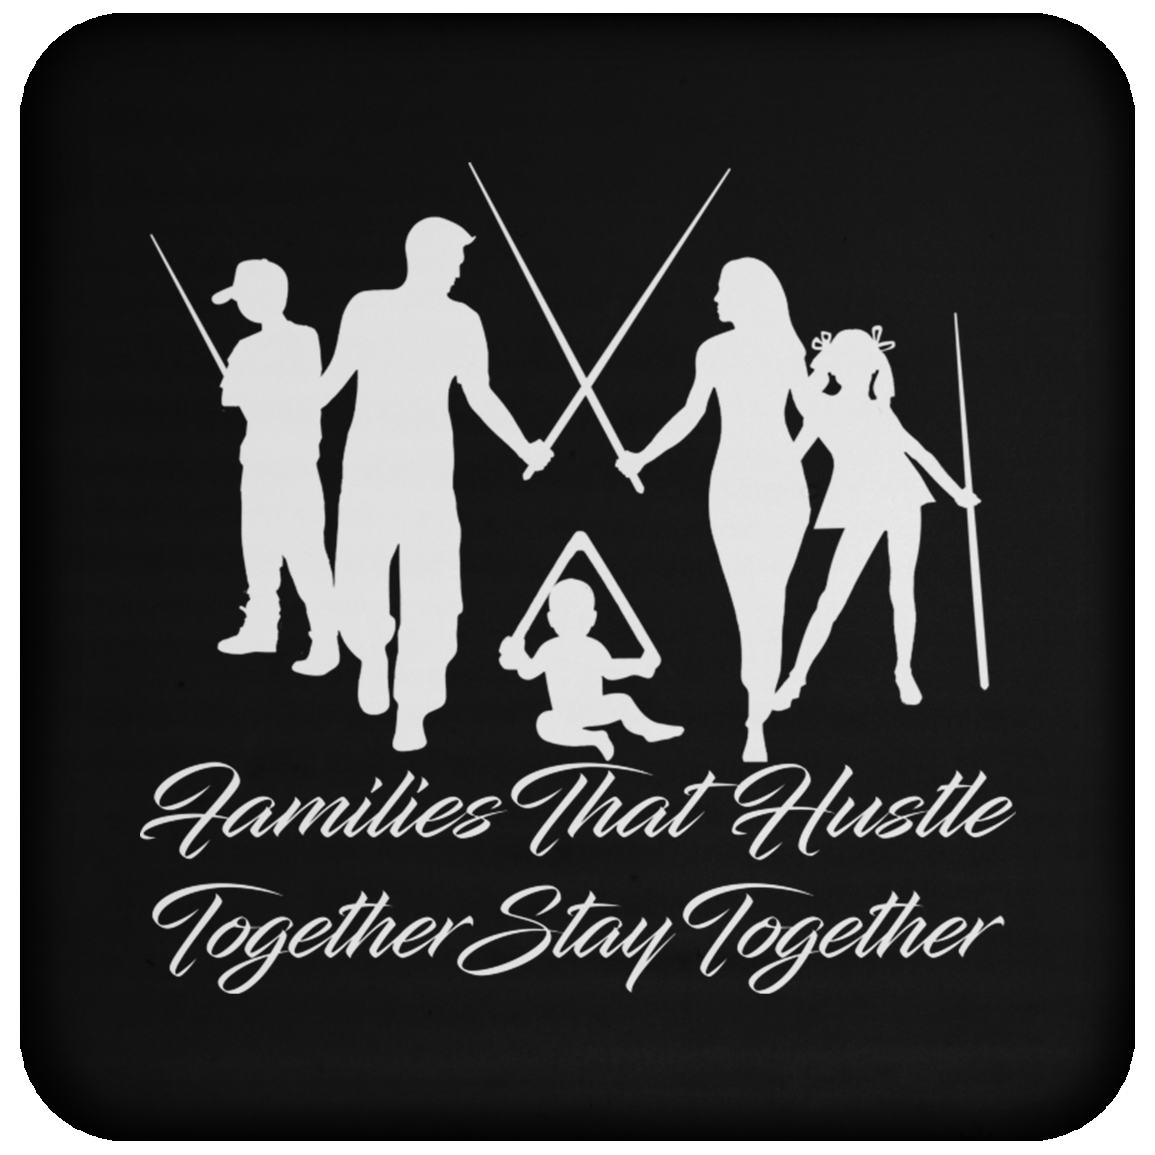 The GHOATS Custom Design. #11 Families That Hustle Together, Stay Together. Coaster